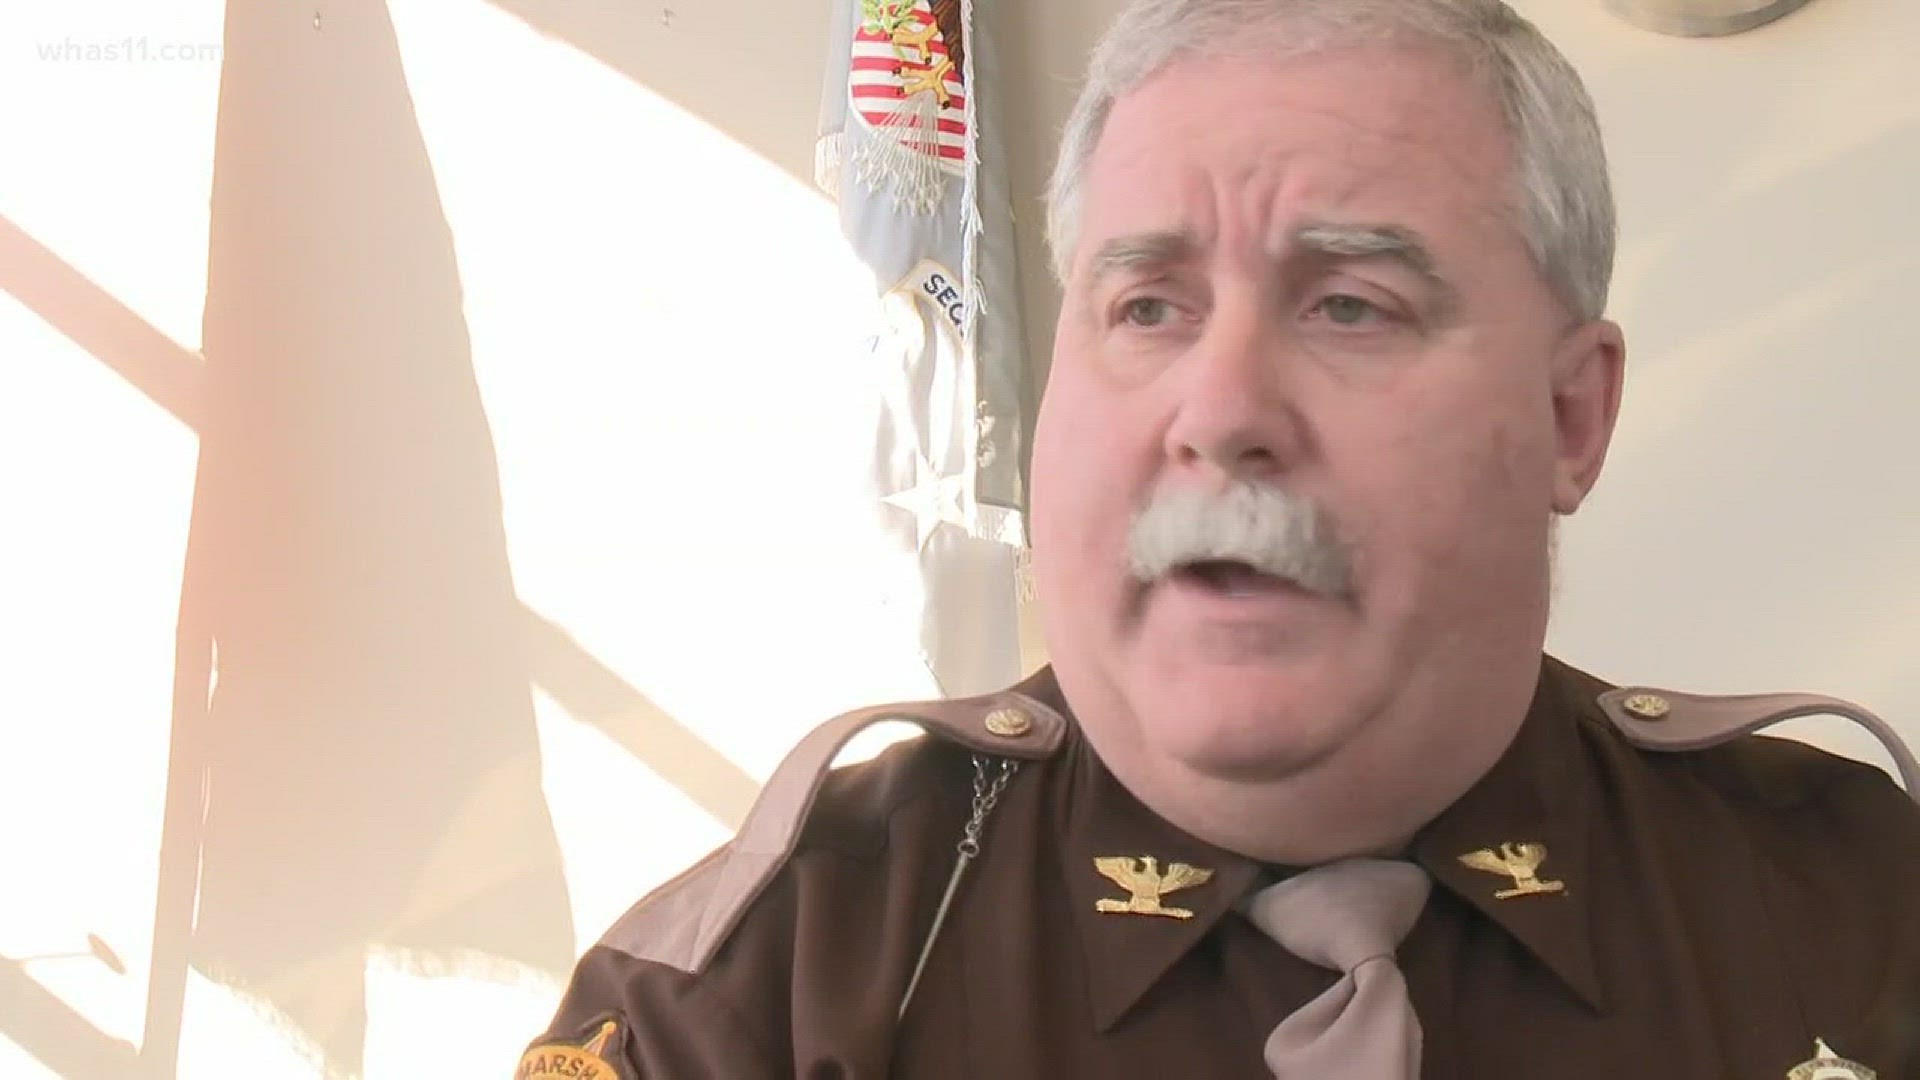 Marshall County Sheriff Kevin Byars says it's been a long time since someone at the federal law enforcement level has had his community's back.